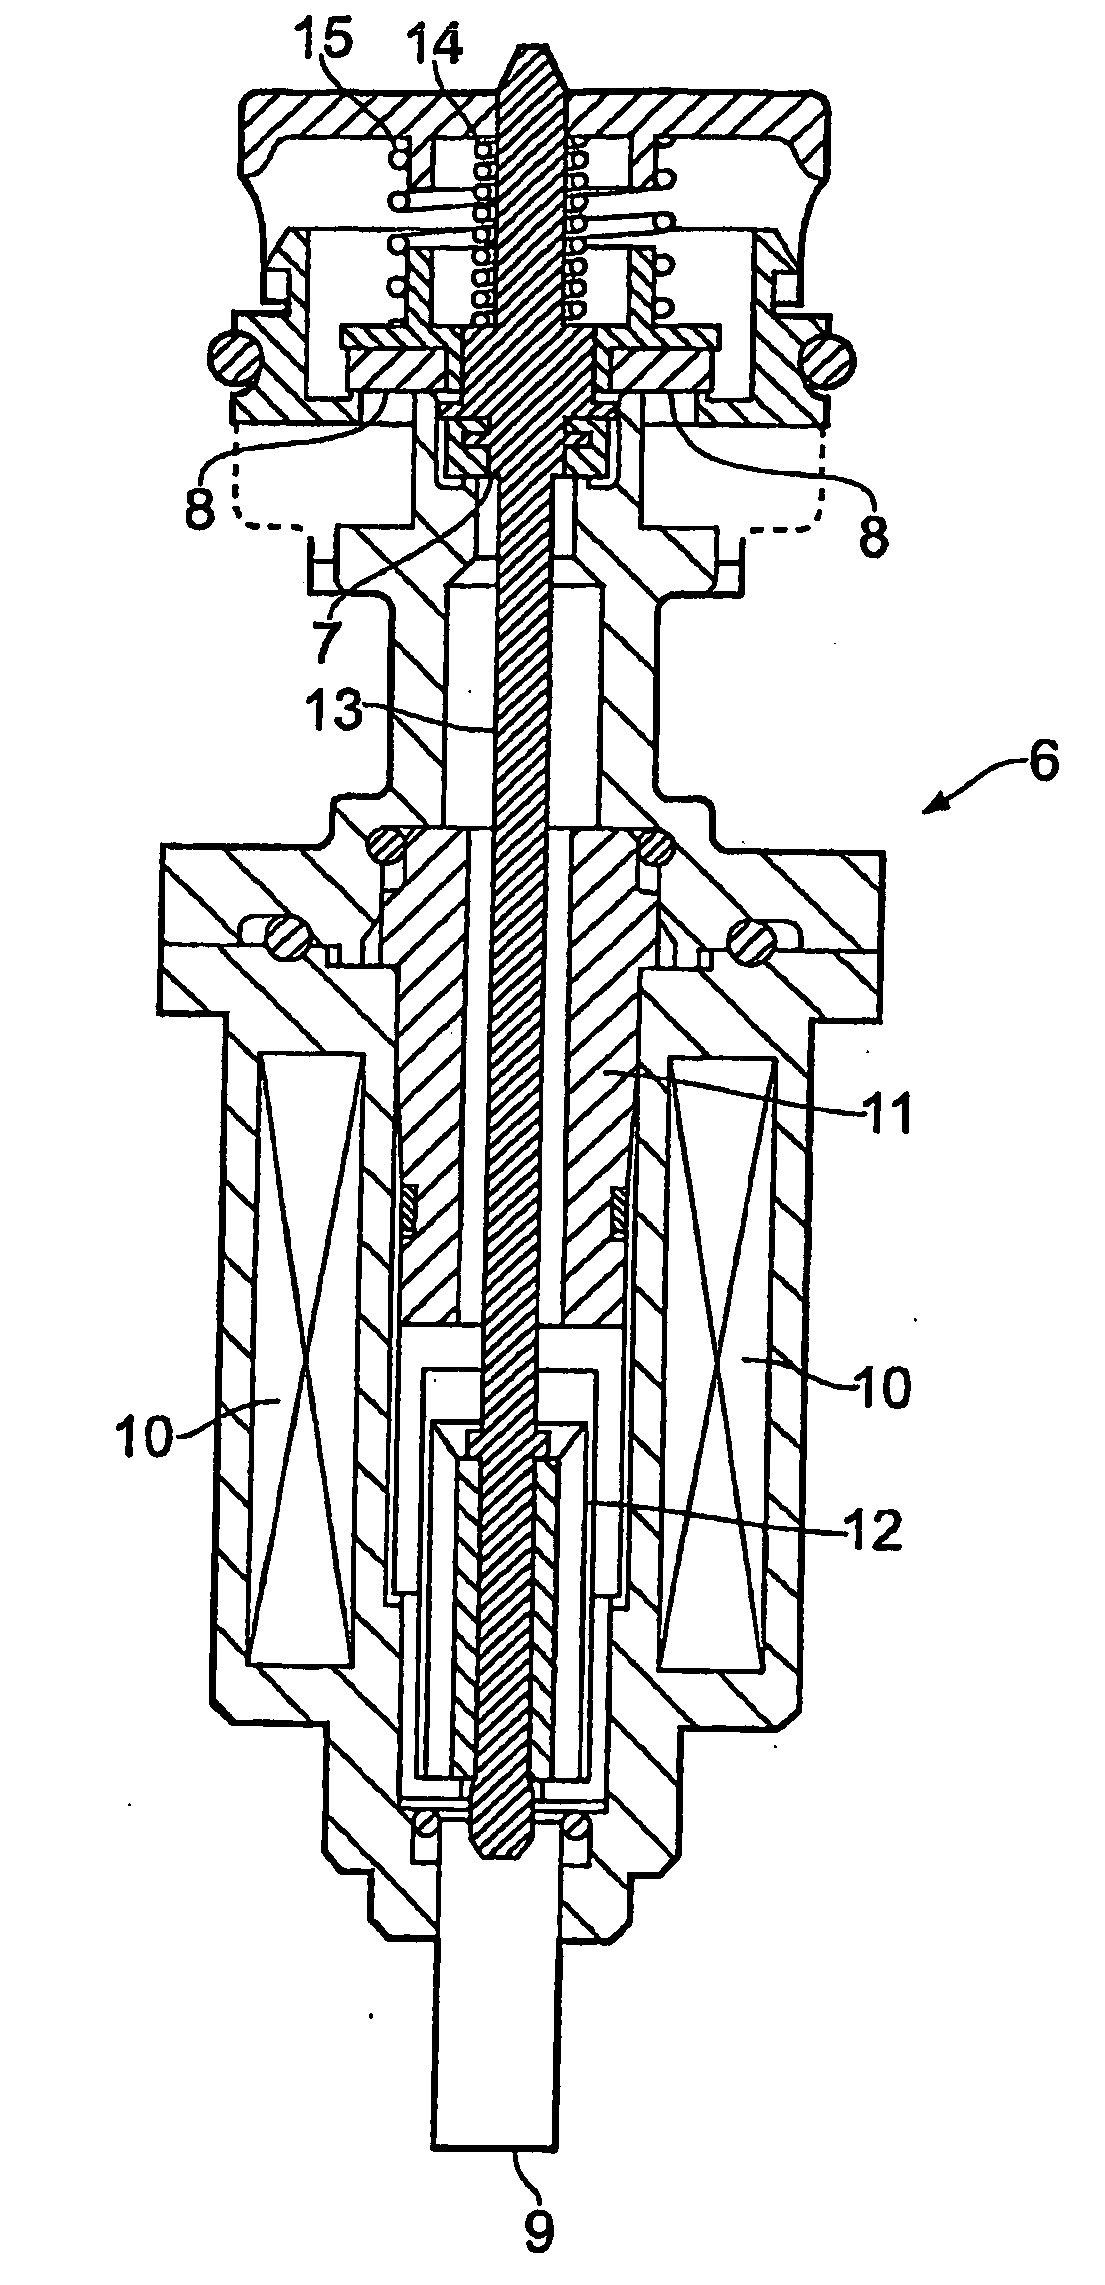 Water draining system for a fuel filter